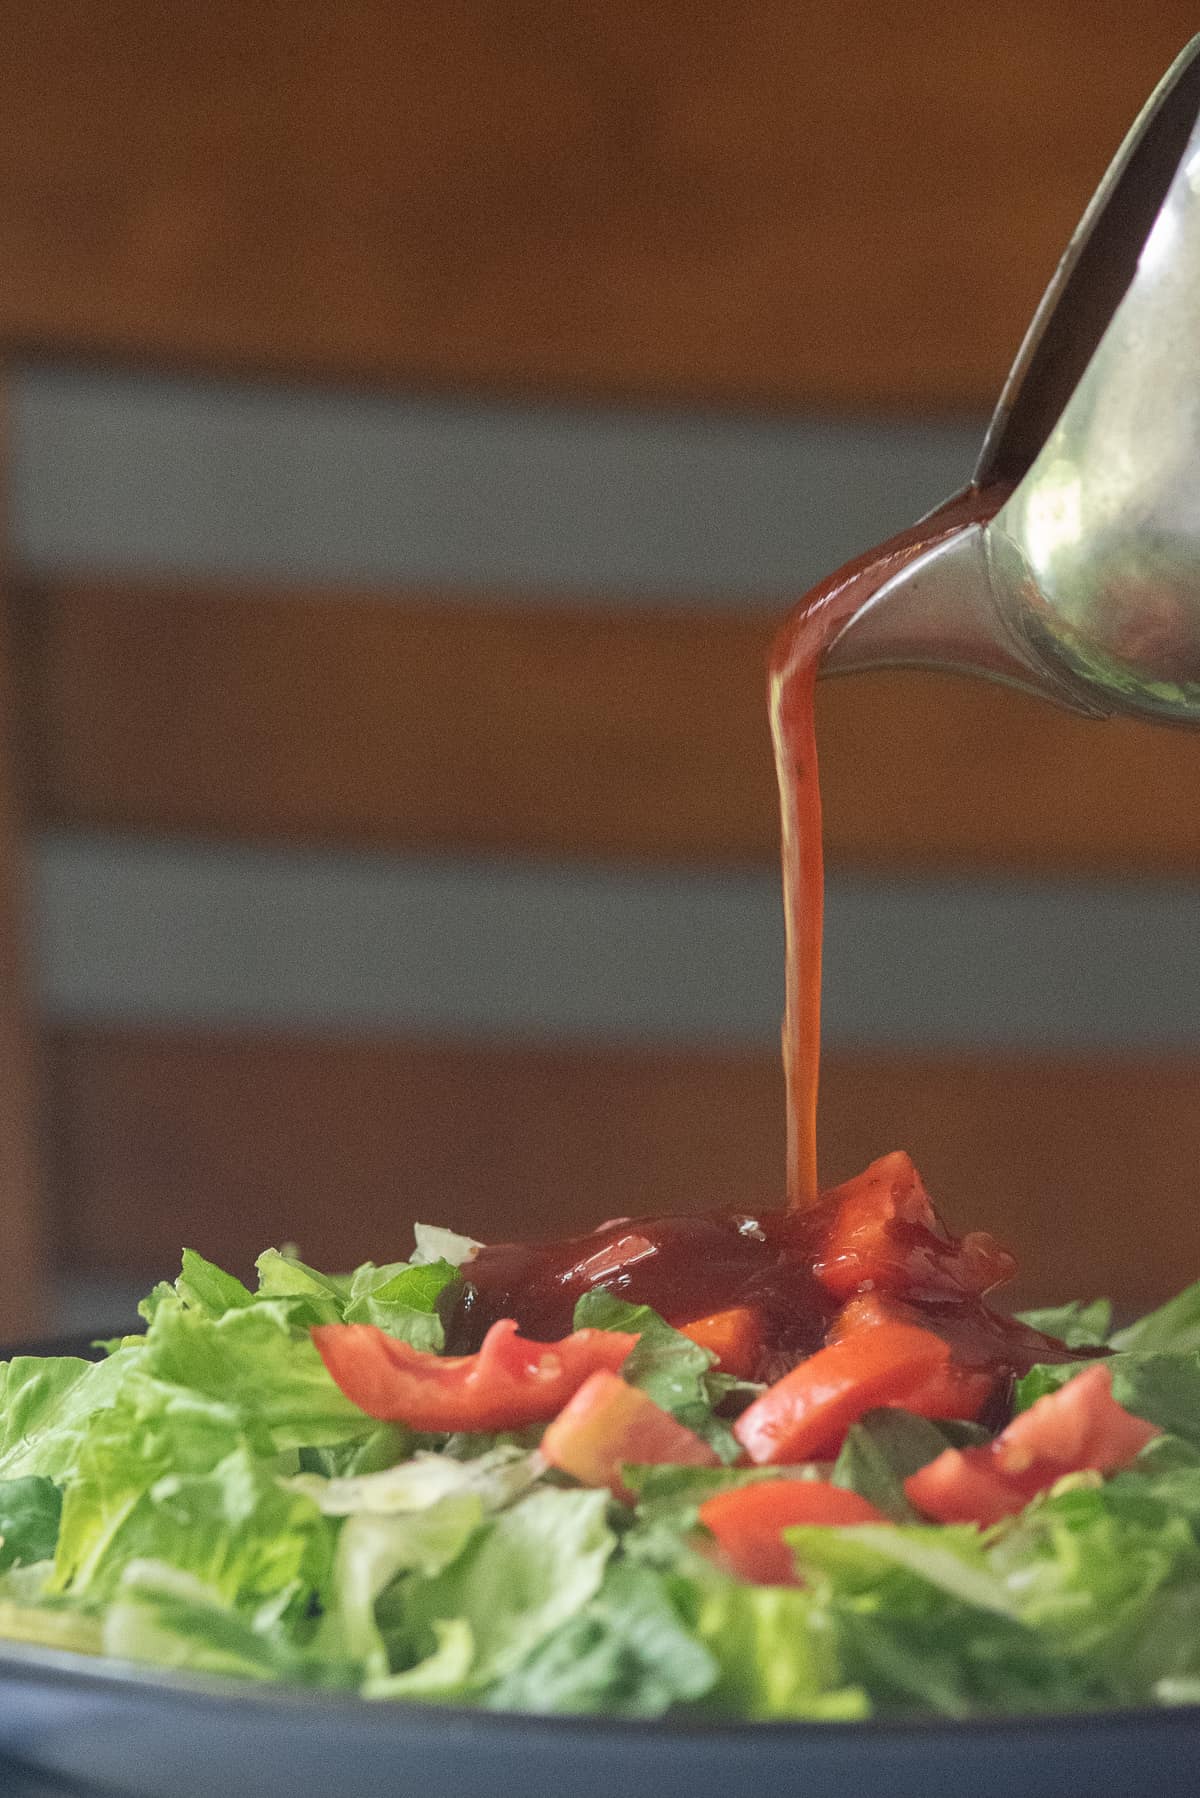 Barbecue Salad Dressing being poured from silver pitcher onto salad